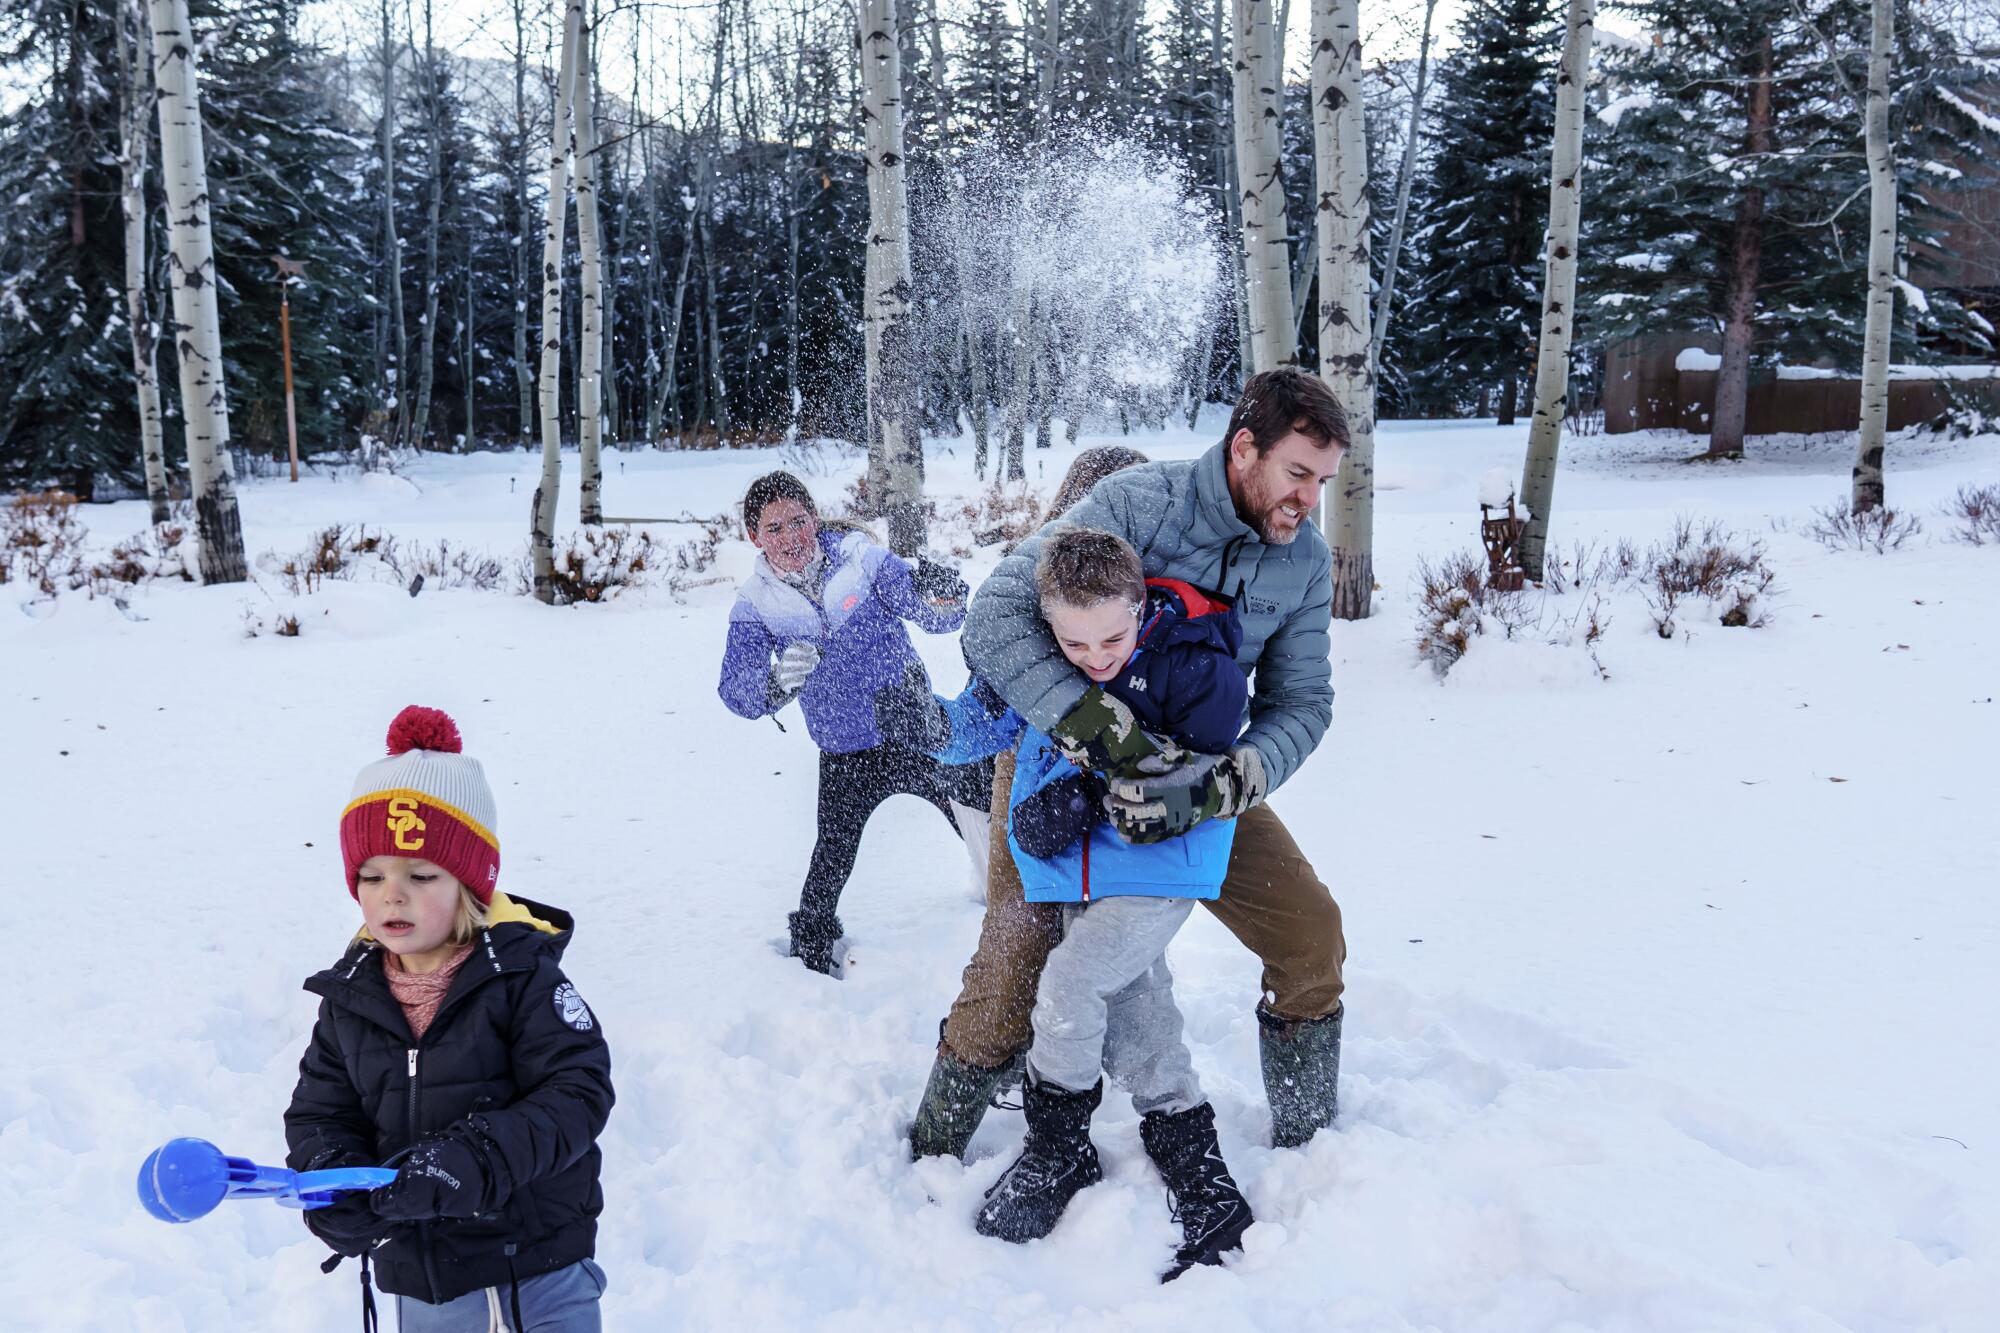 Carson Palmer gets hammered with a snowball as he tries to take a portrait with his children.